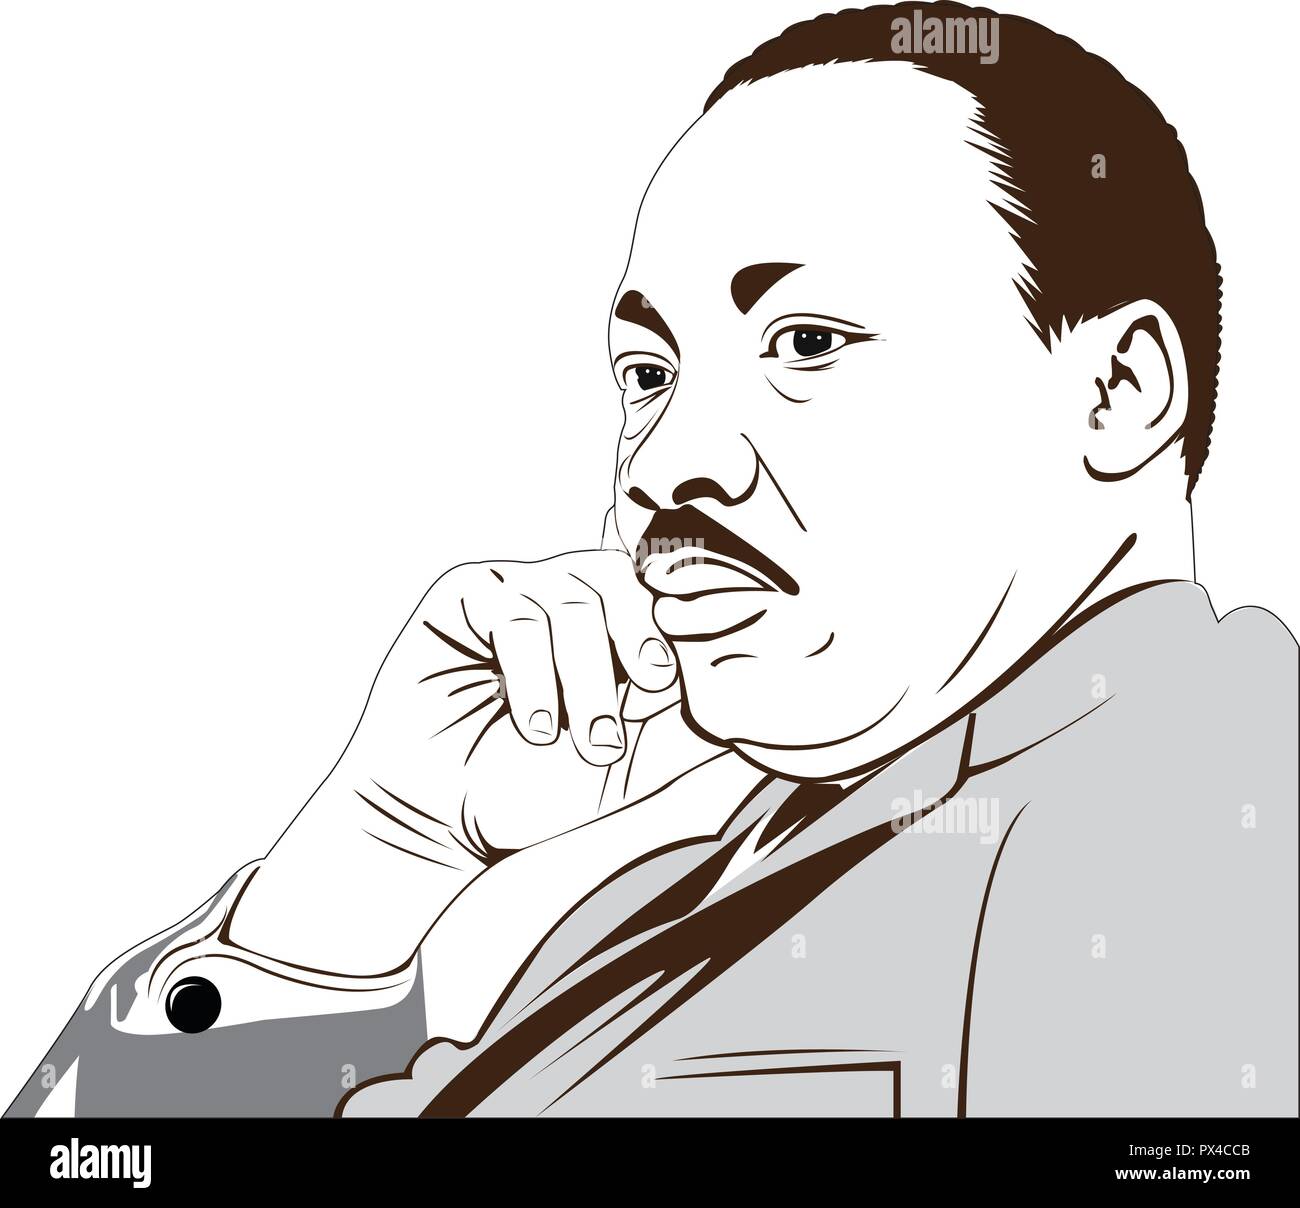 Martin Luther King Jr. (1929 – 1968) an American.  where he delivered his famous 'I Have a Dream' speech. vector image of martin luther king. Stock Vector